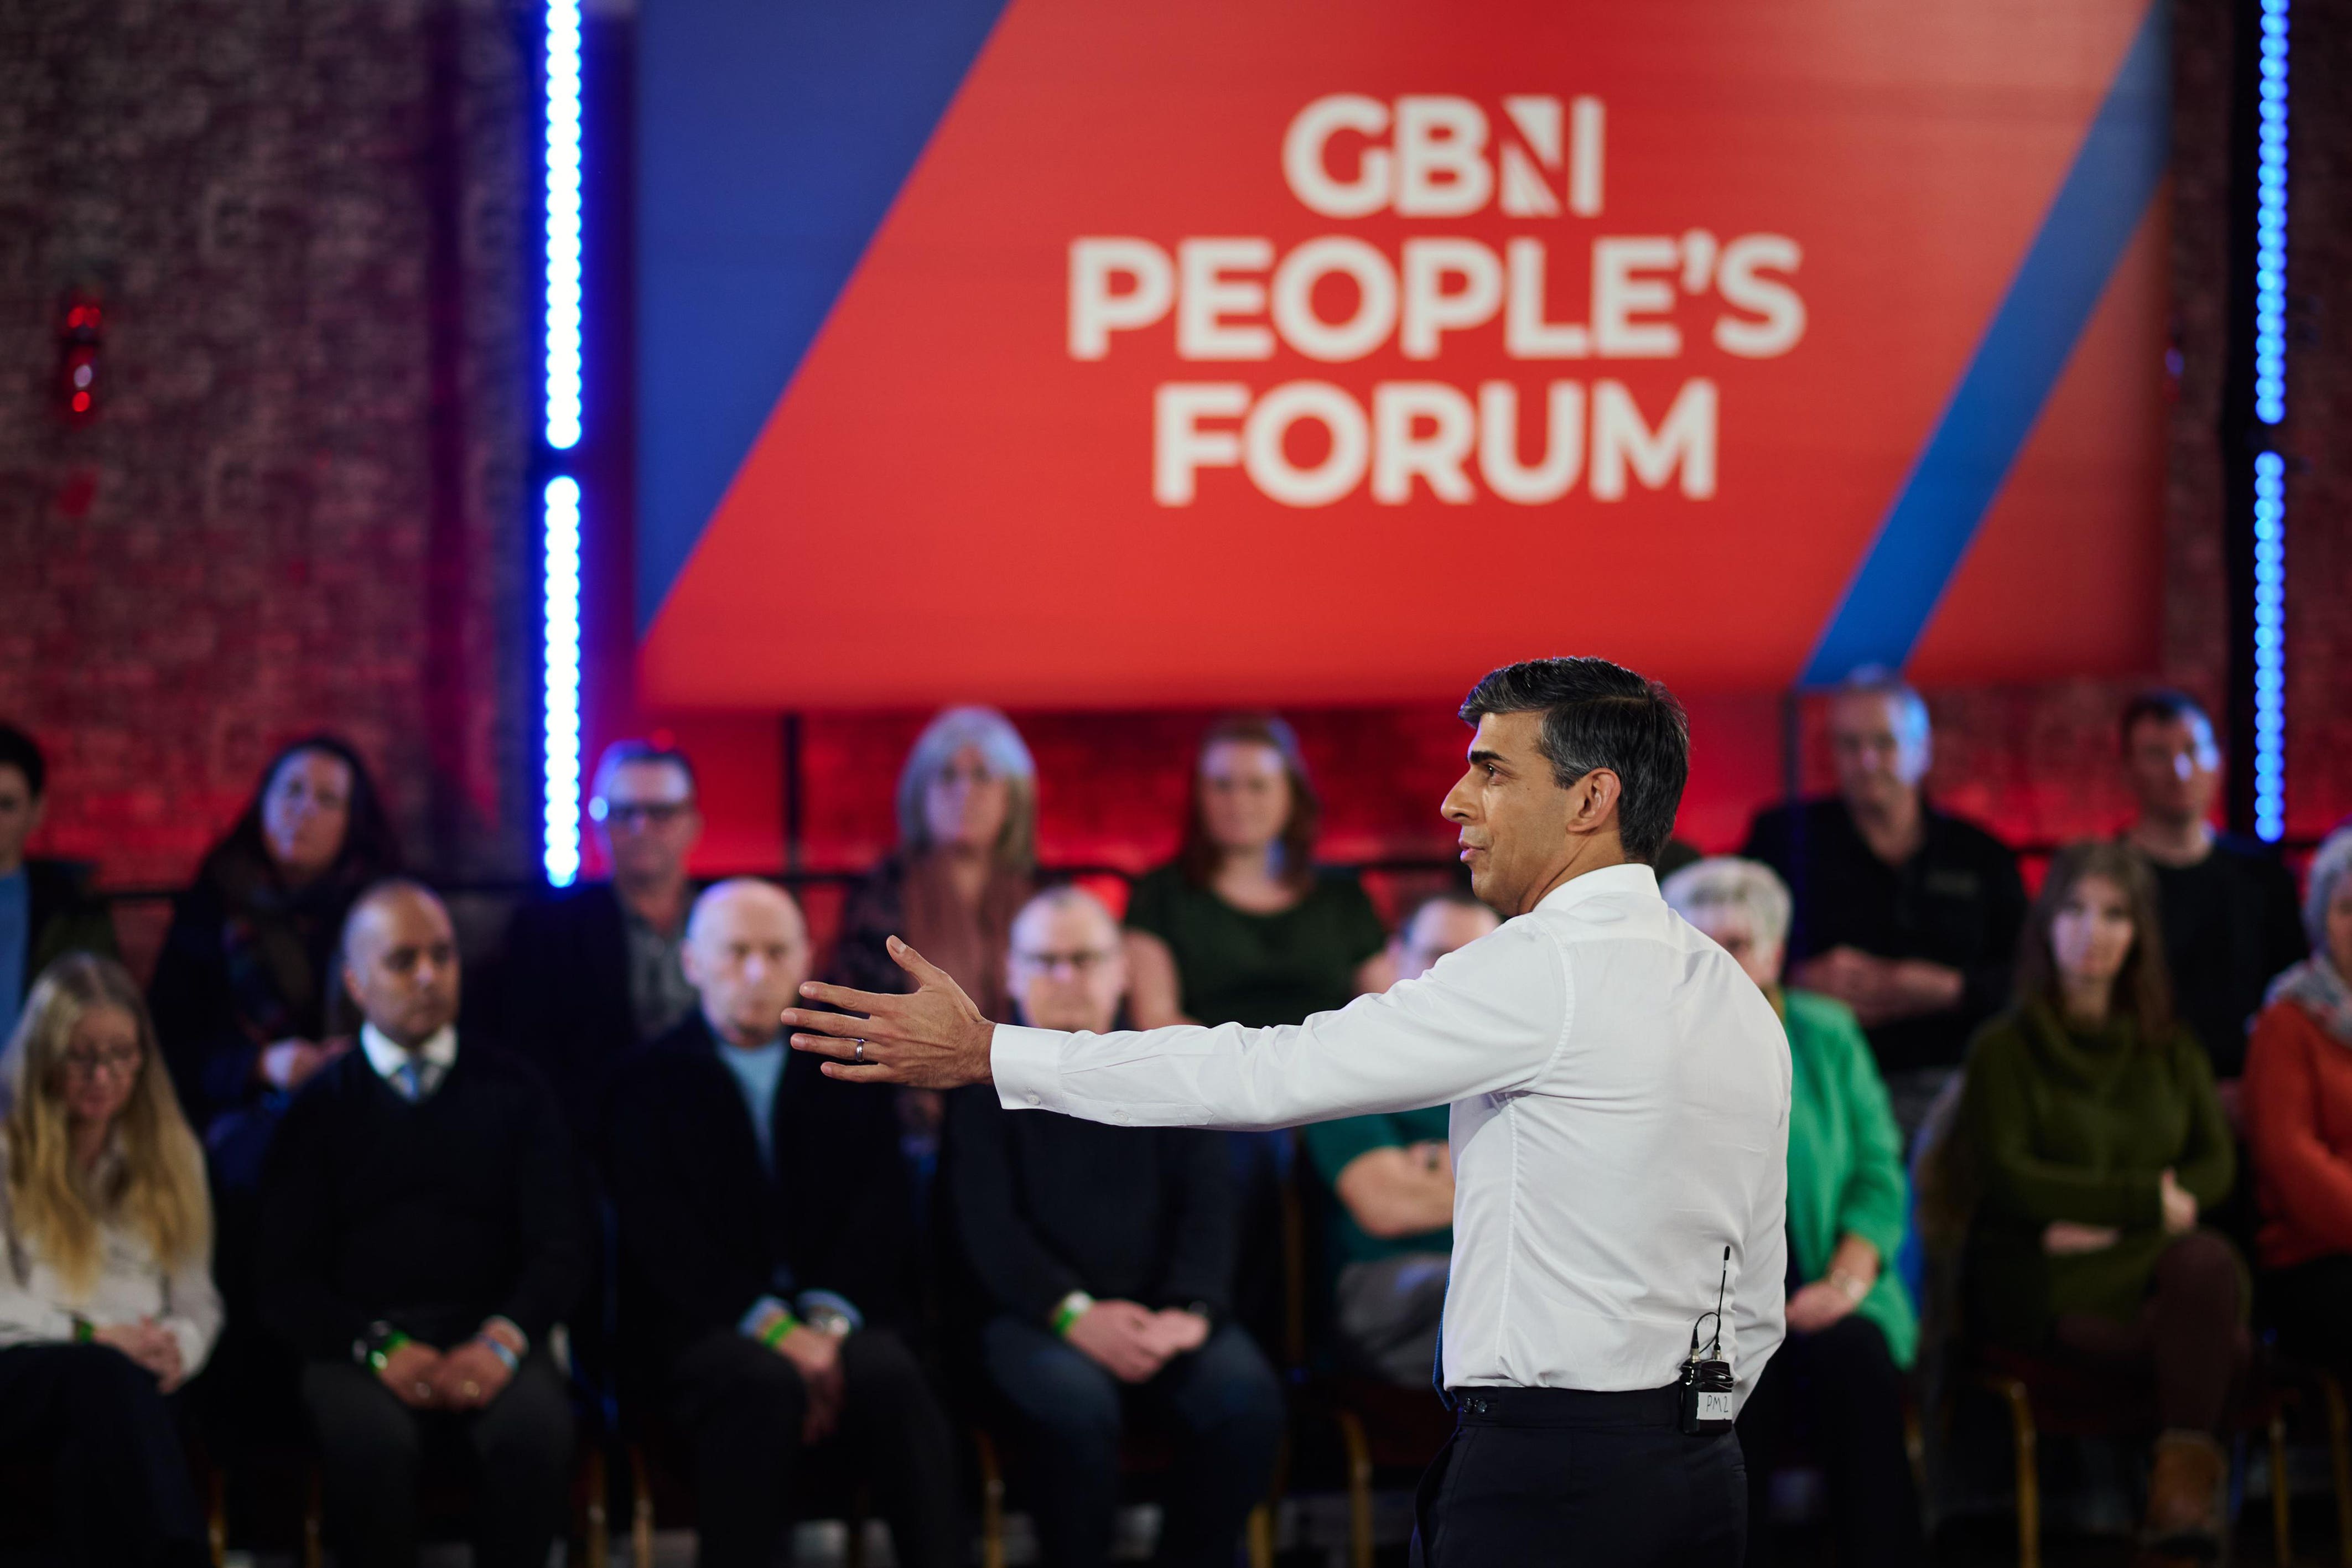 Rishi Sunak during GB News’s People’s Forum earlier this month